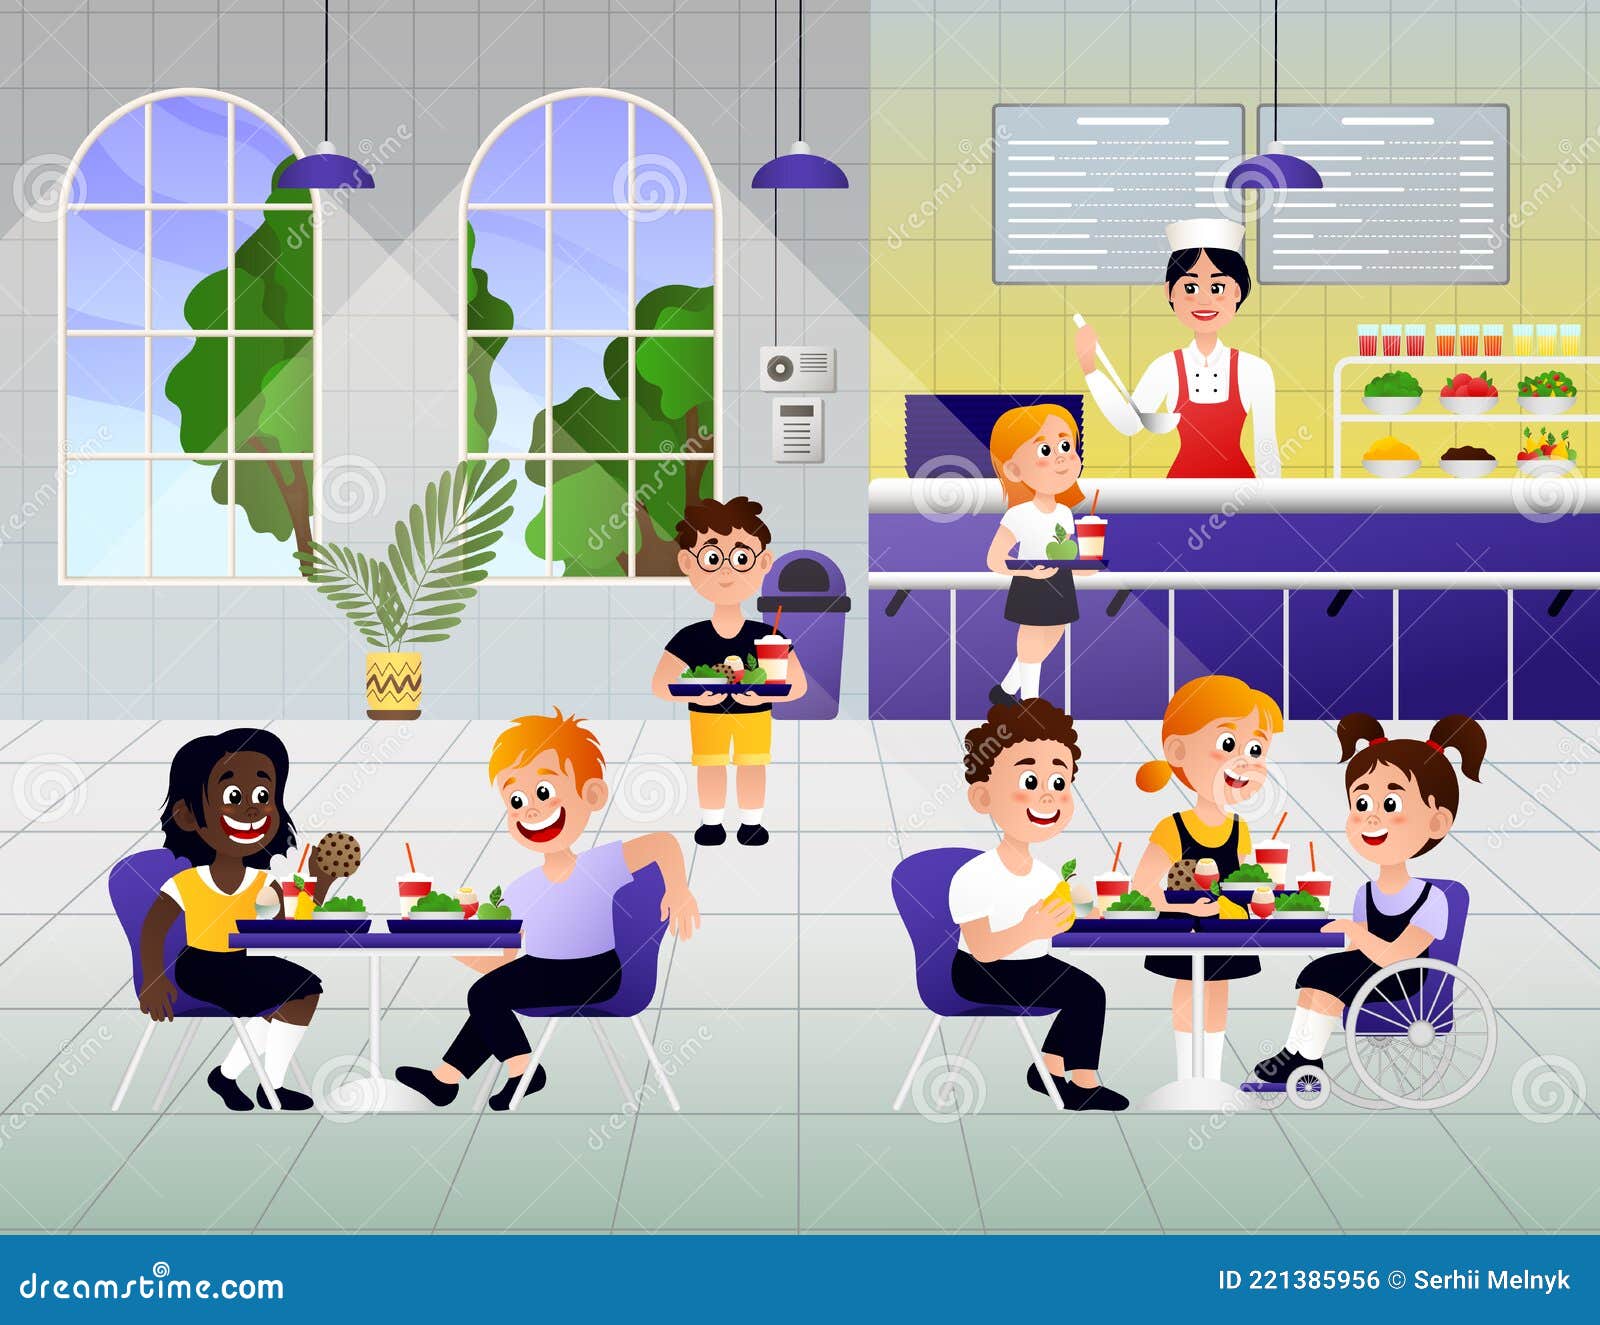 Children eat in canteen stock vector. Illustration of sitting - 221385956